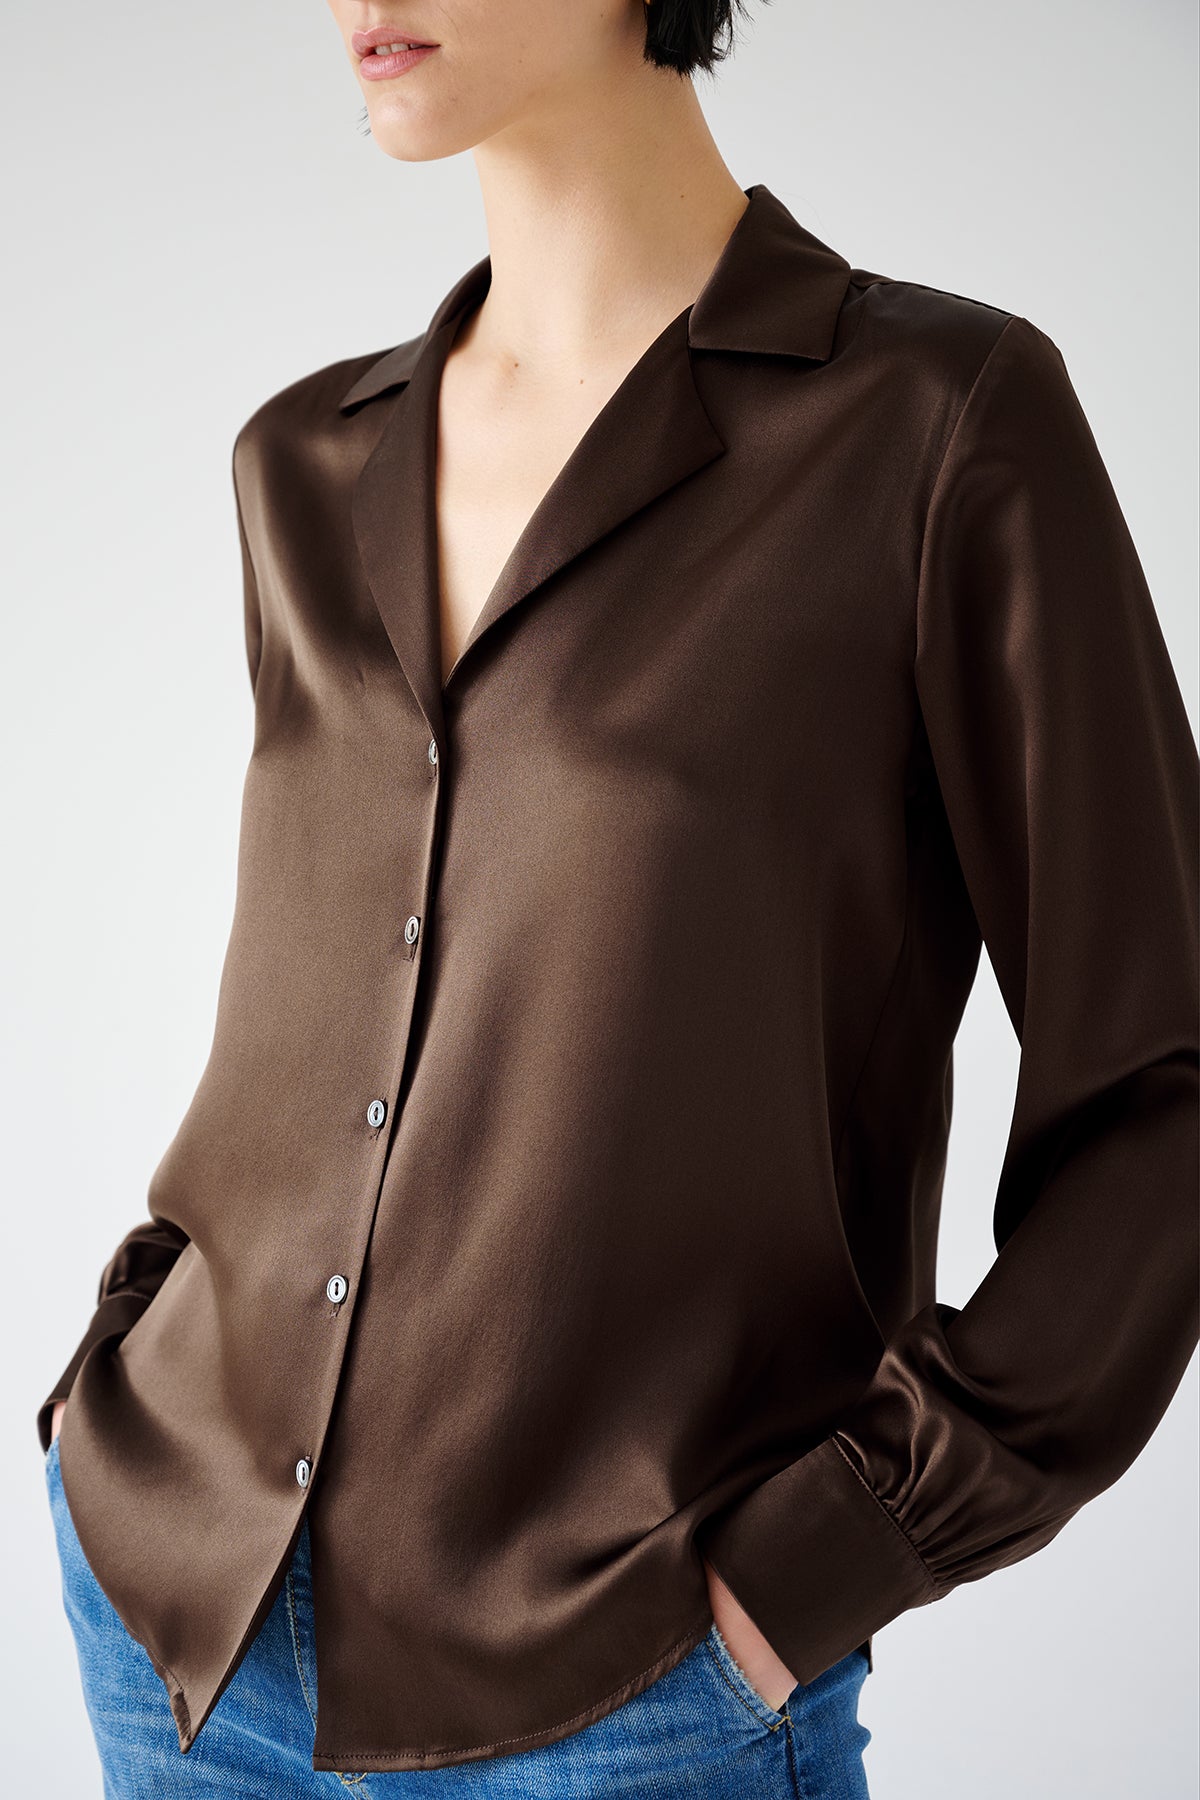 The model is wearing a timeless SOHO TOP brown silk button-up blouse by Velvet by Jenny Graham.-35547448869057